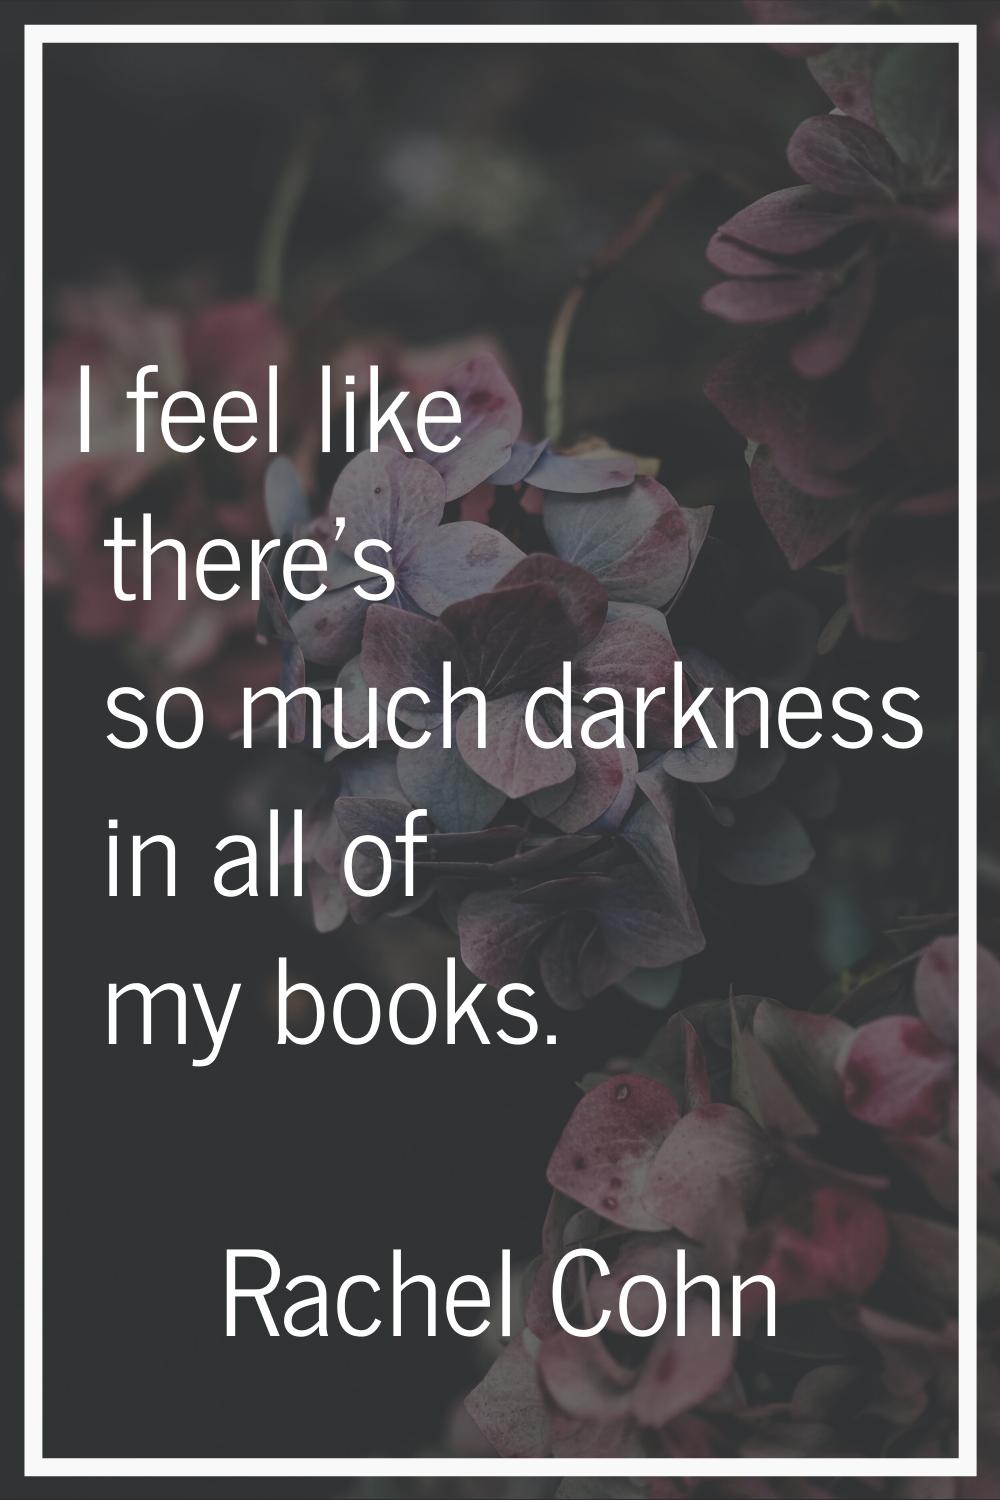 I feel like there's so much darkness in all of my books.